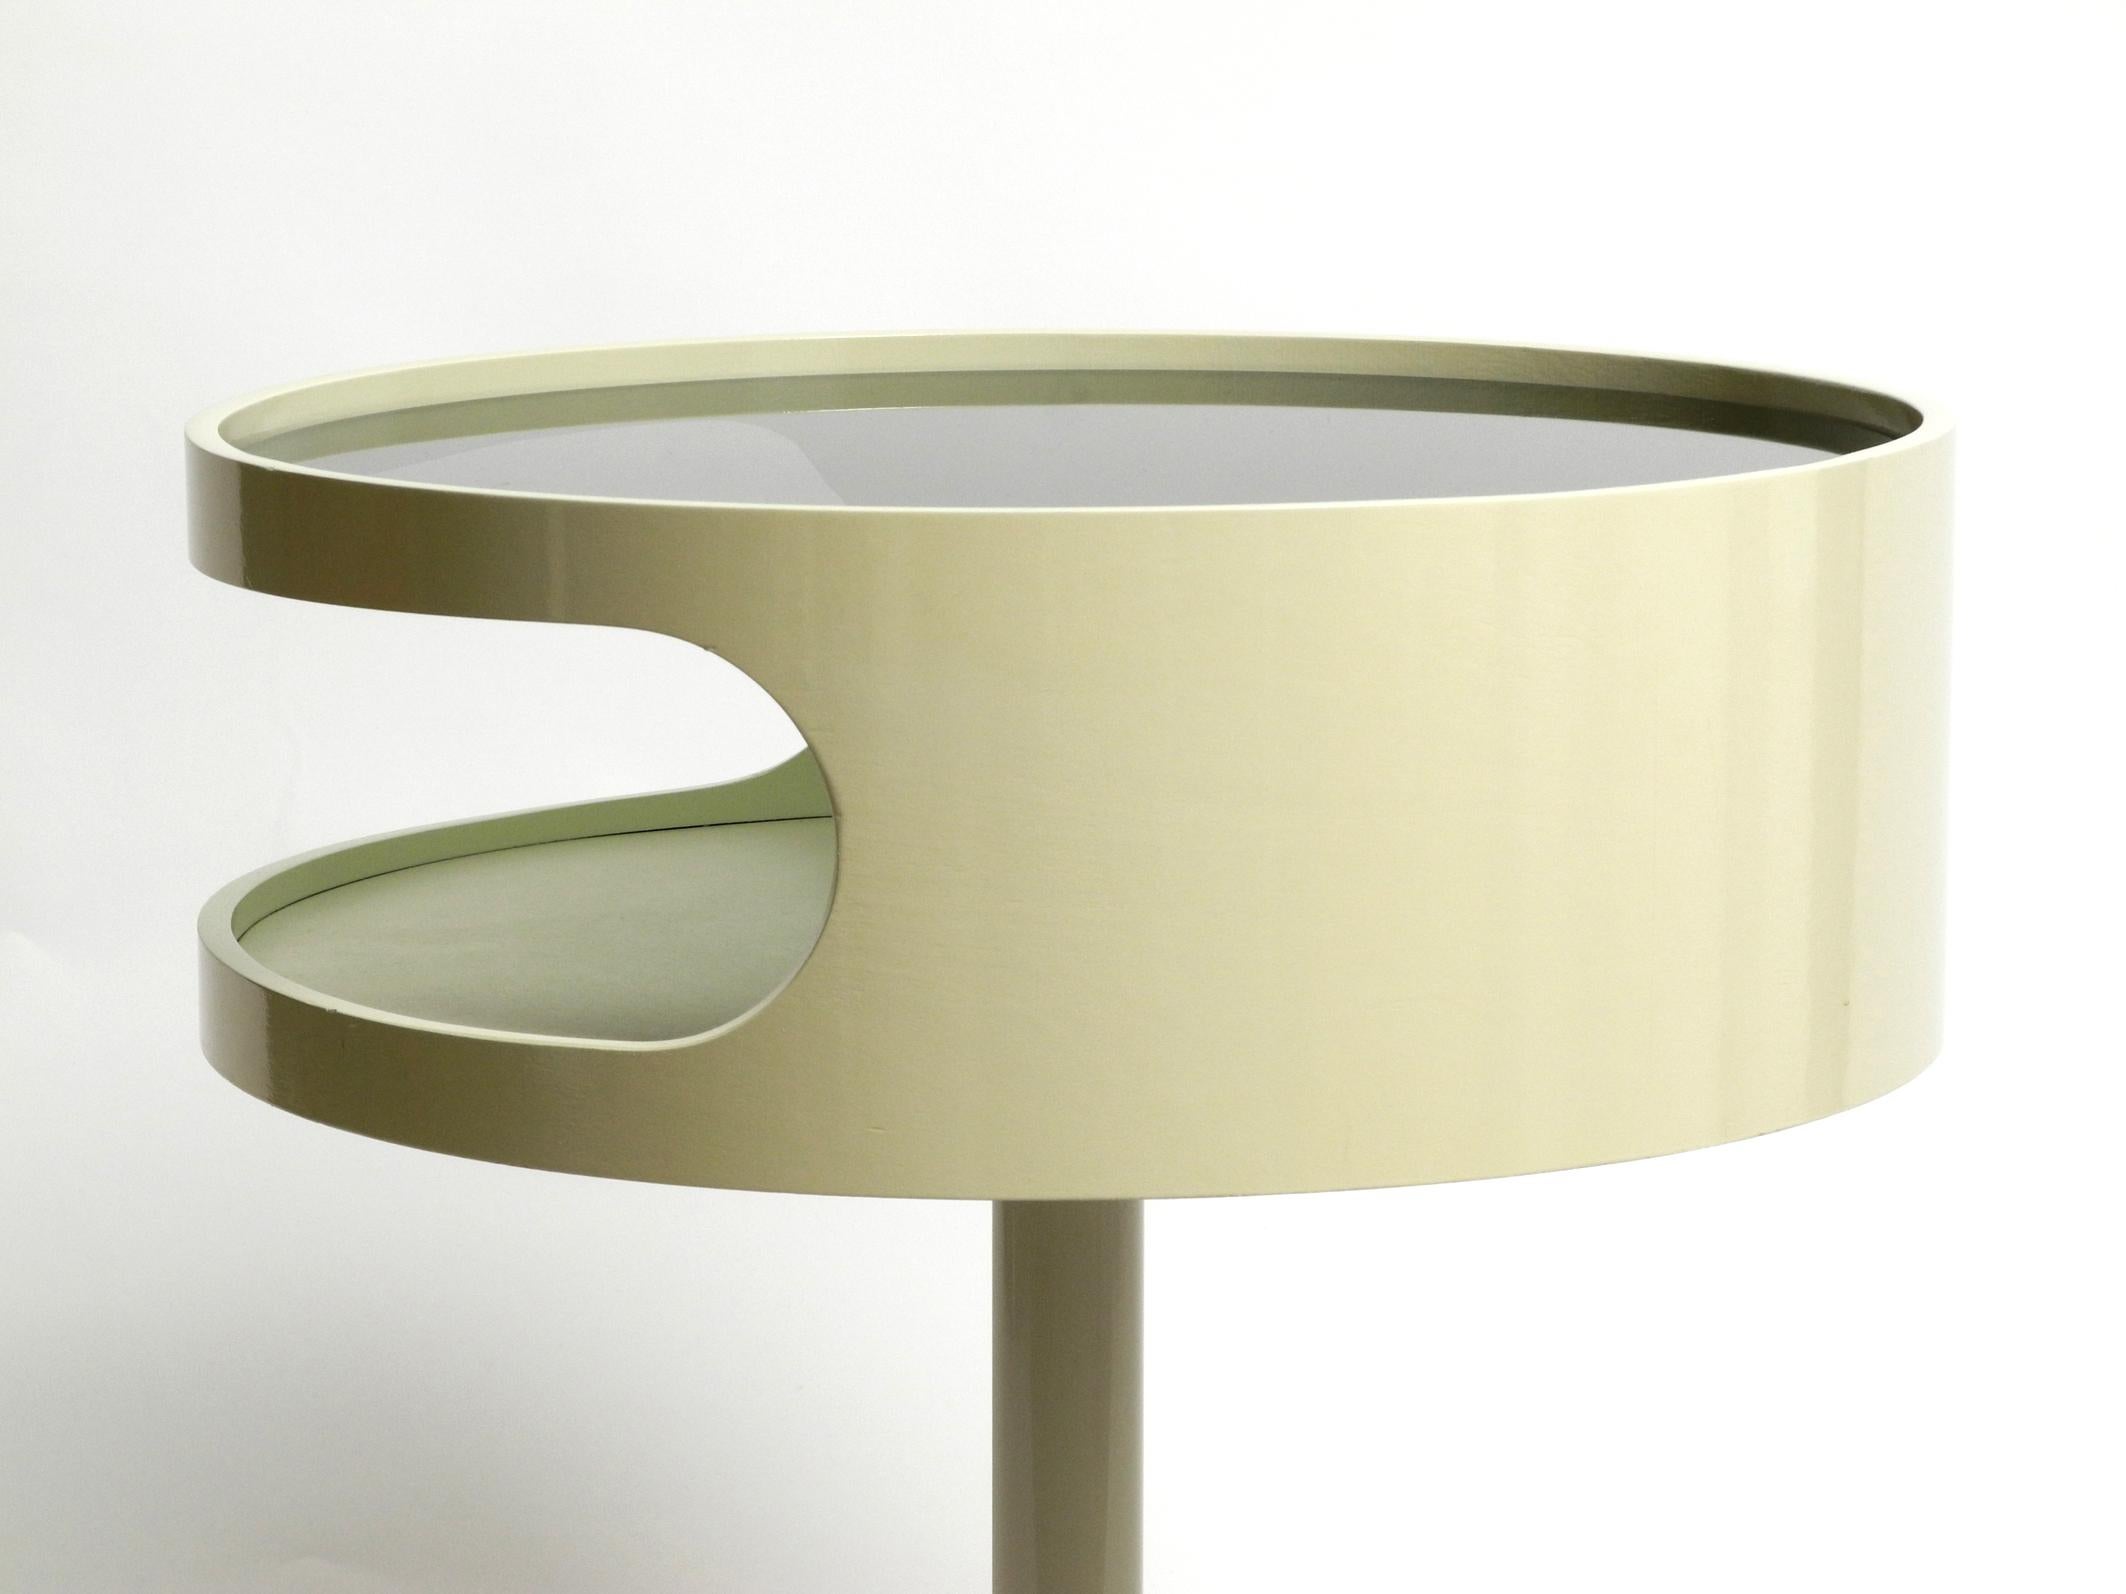 Metal Rare 1970s Side Table in Space Age Design with Smoked Glass Top by OPAL Möbel